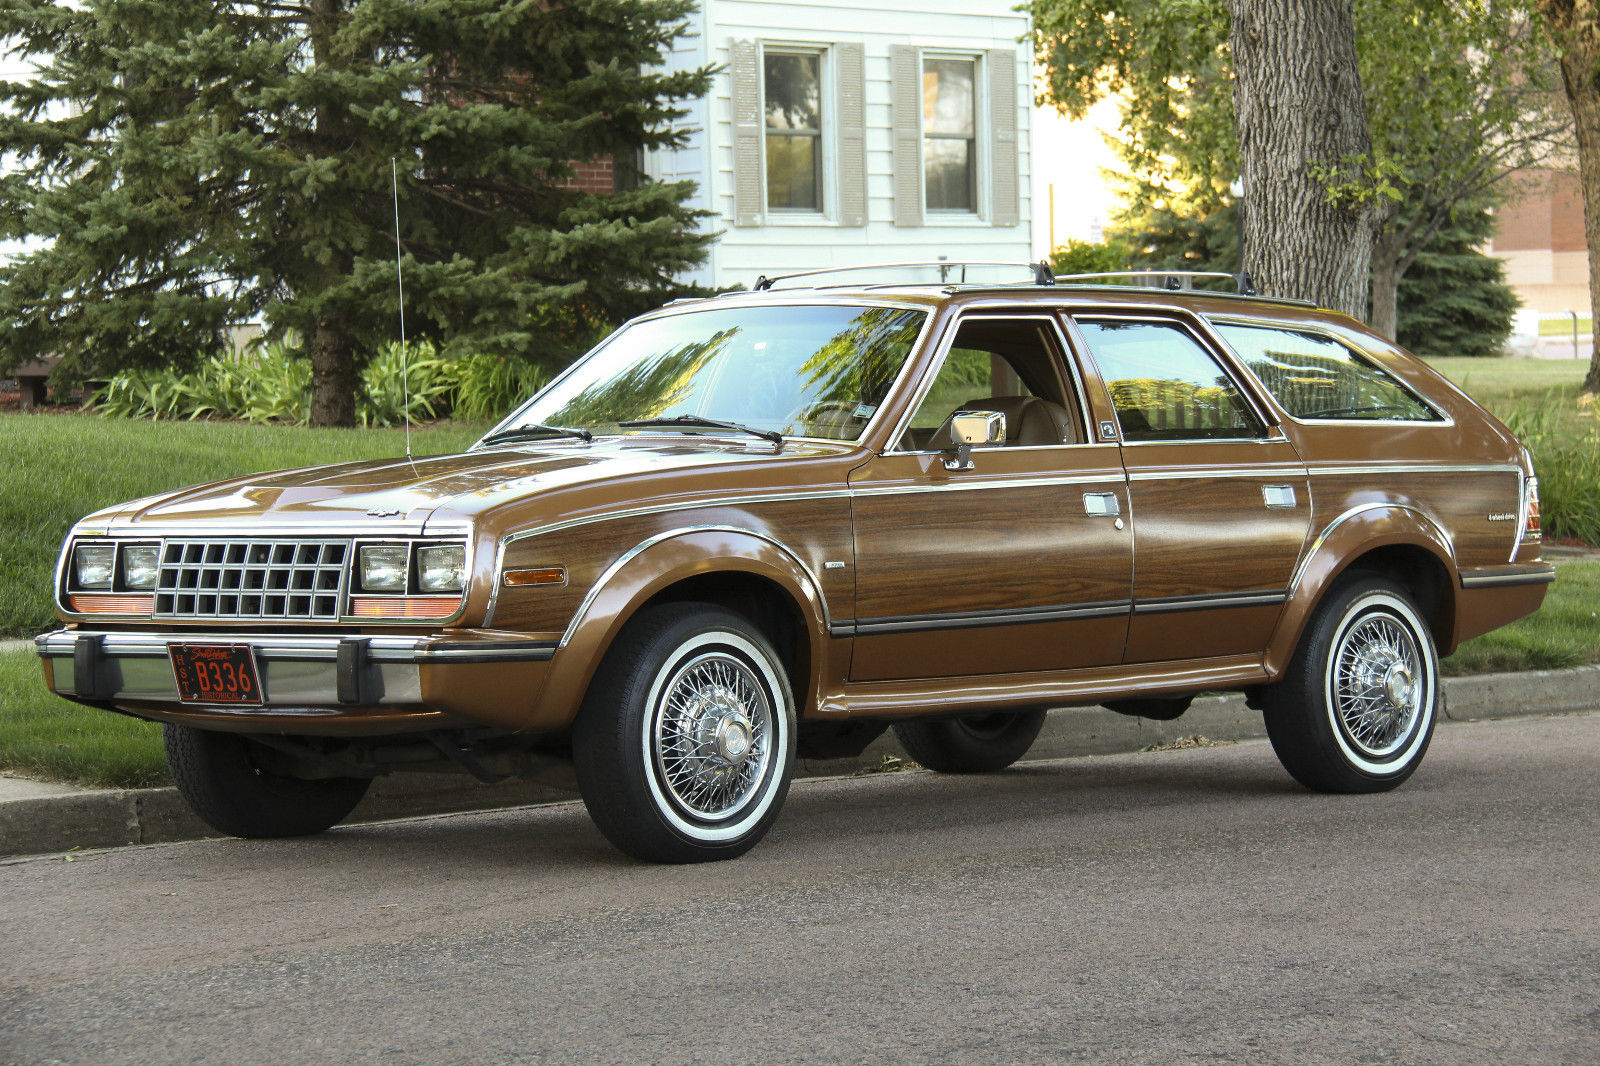 Daily Turismo: Auction Watch: 1986 AMC Eagle